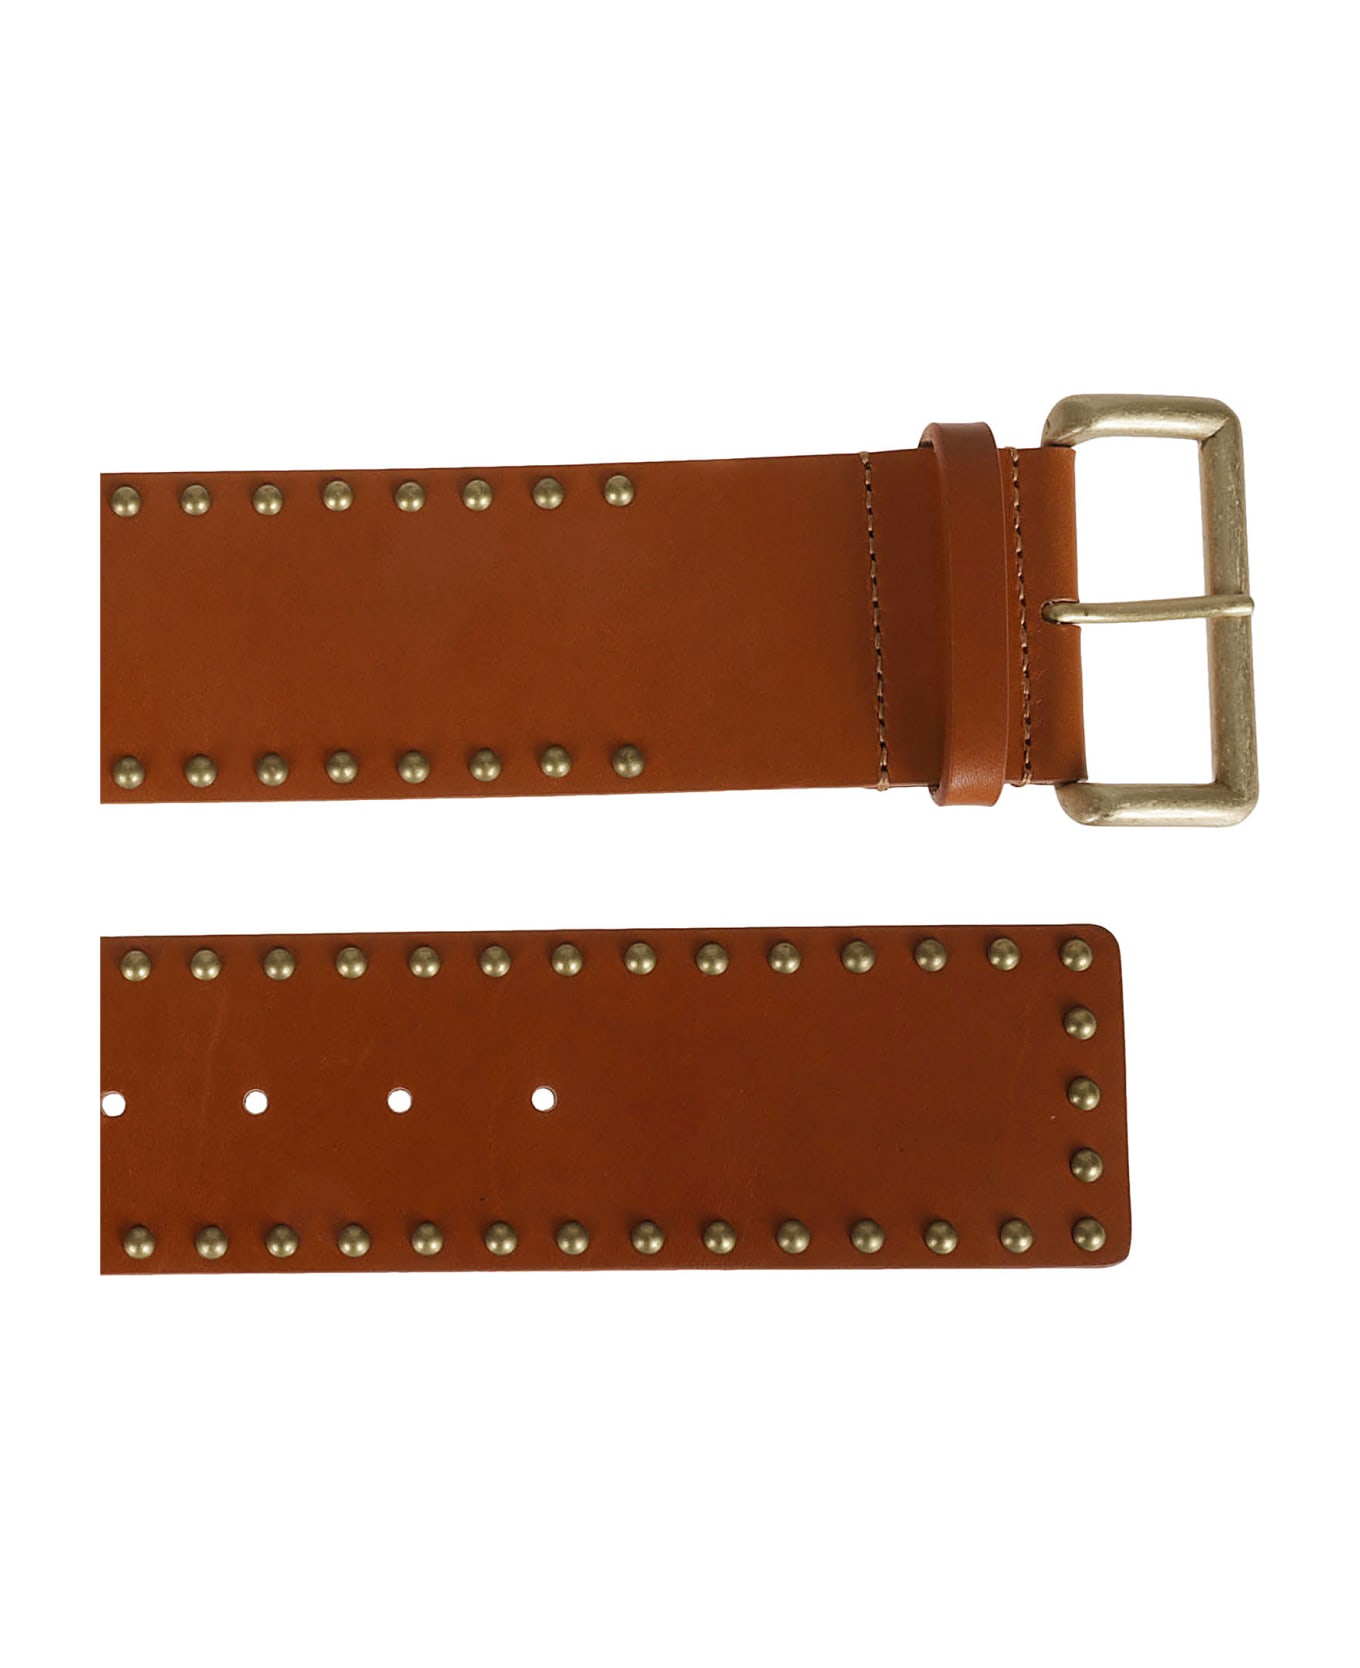 Zamattio Alessia  Belts Leather Brown - Leather Brown